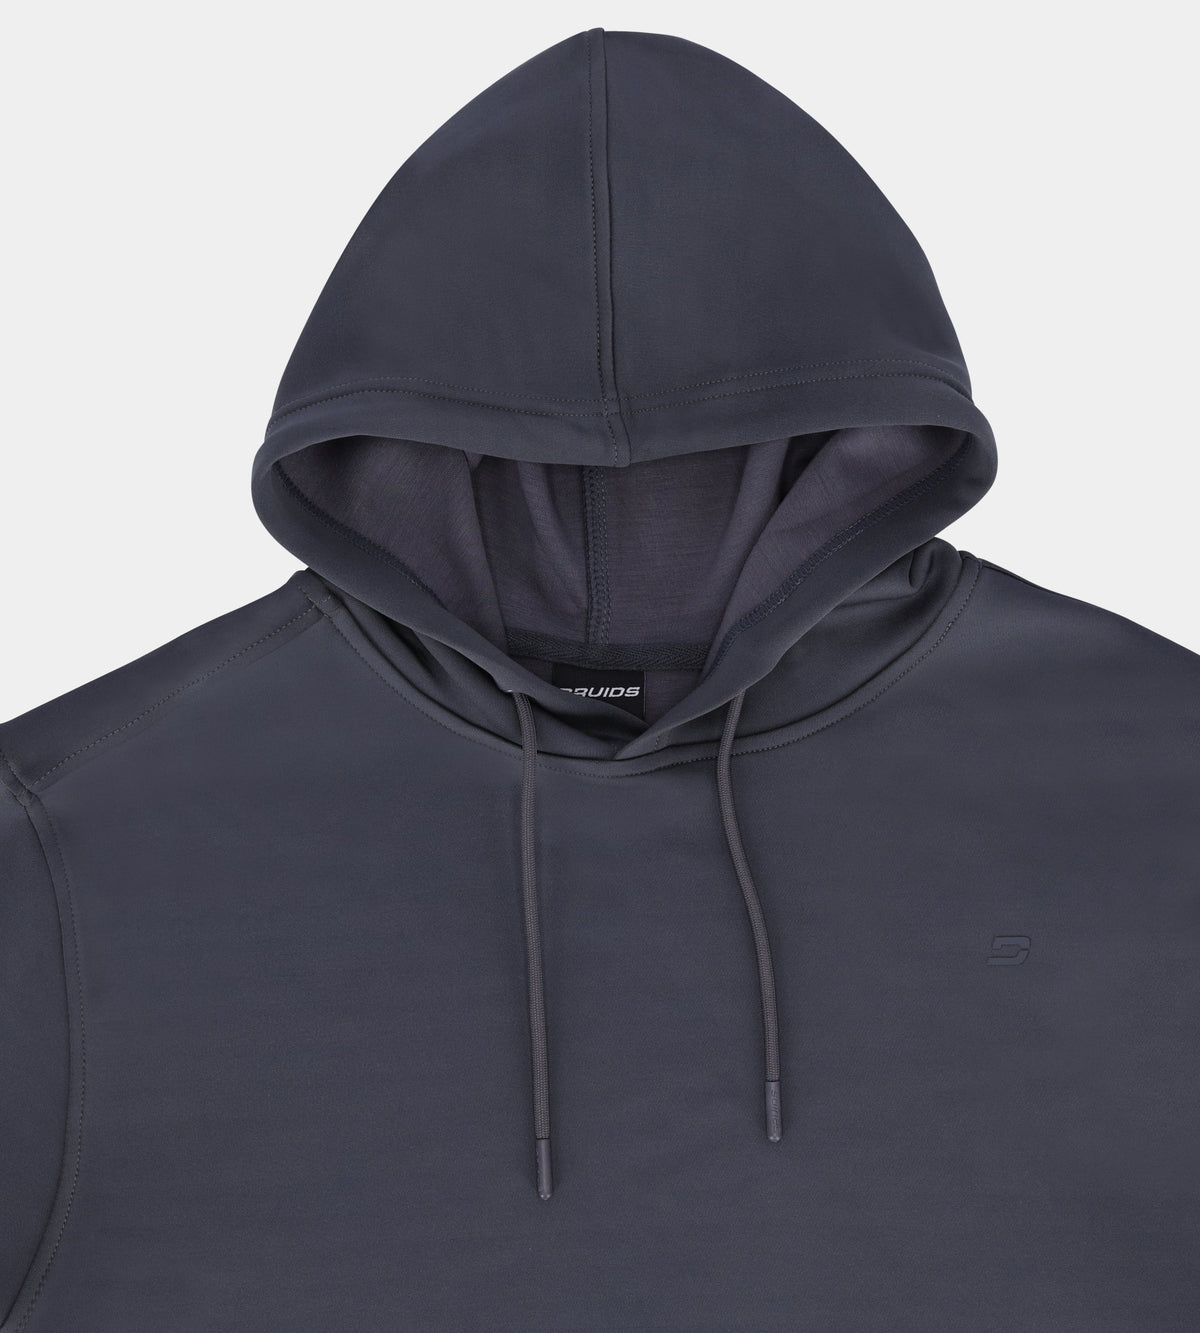 GRIFFIN HOODIE - CHARCOAL - DRUIDS